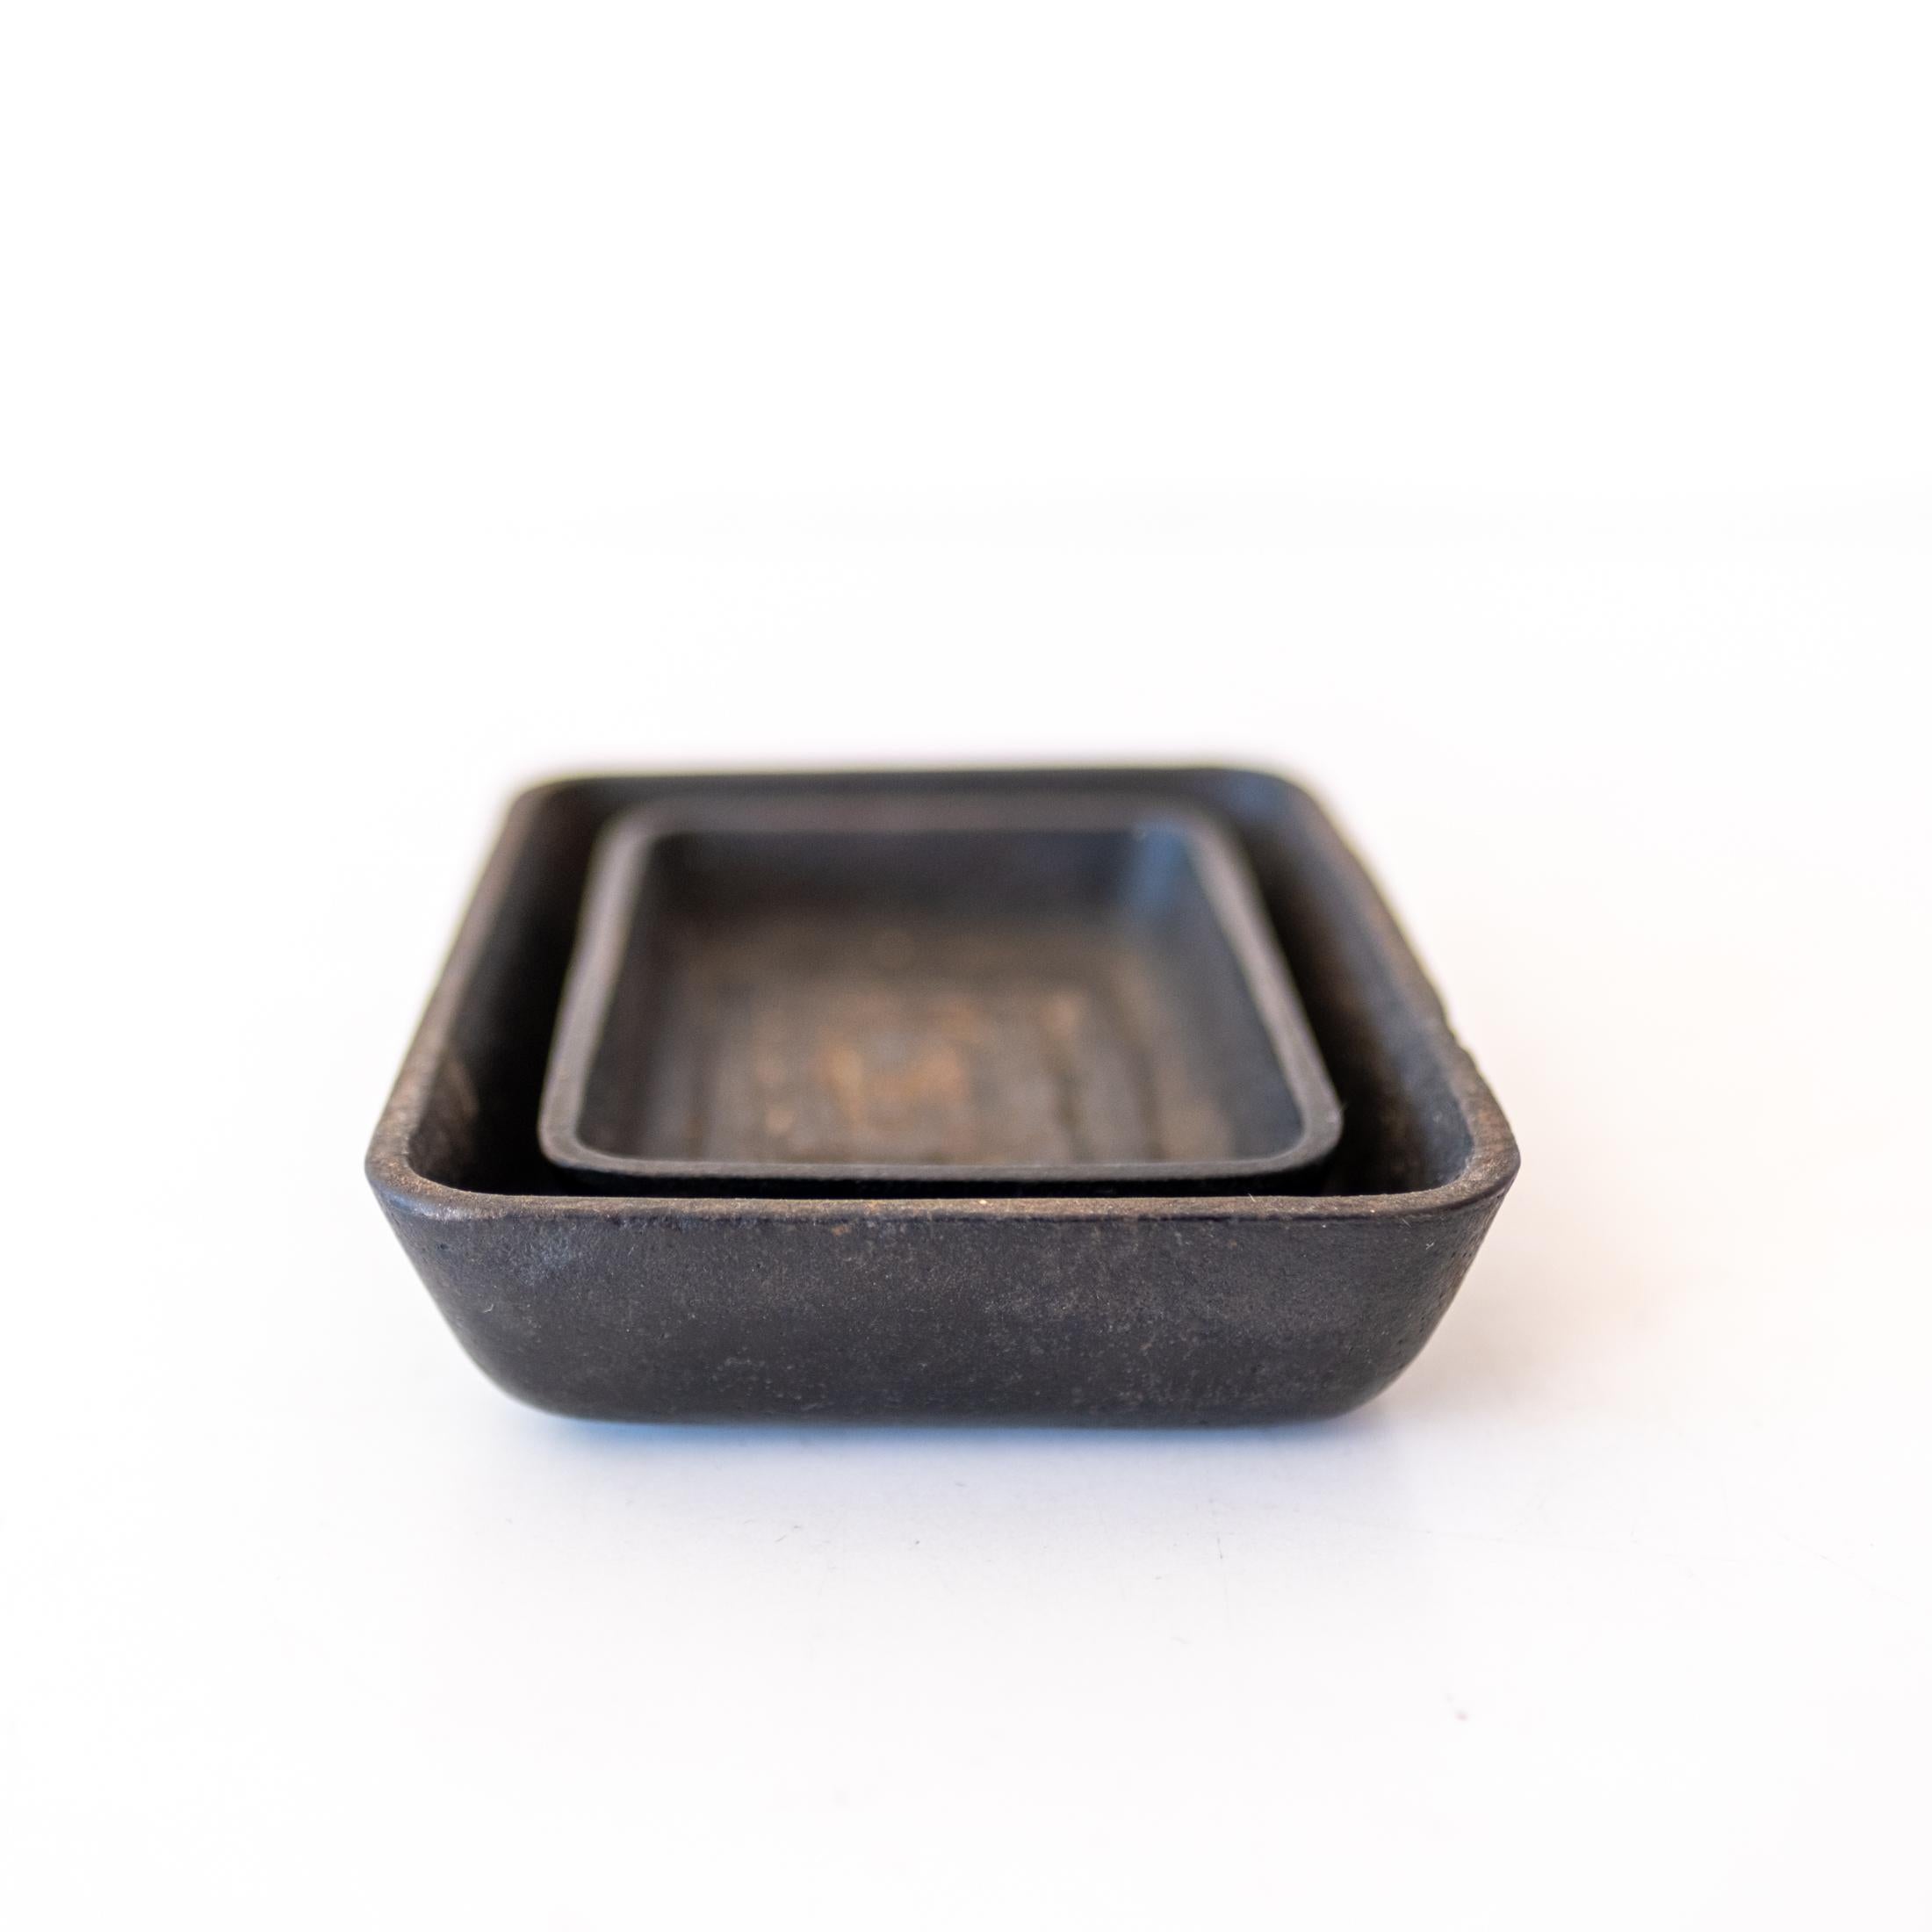 Modernist Iron Nesting Incense Bowls or Ashtray In Good Condition For Sale In San Diego, CA